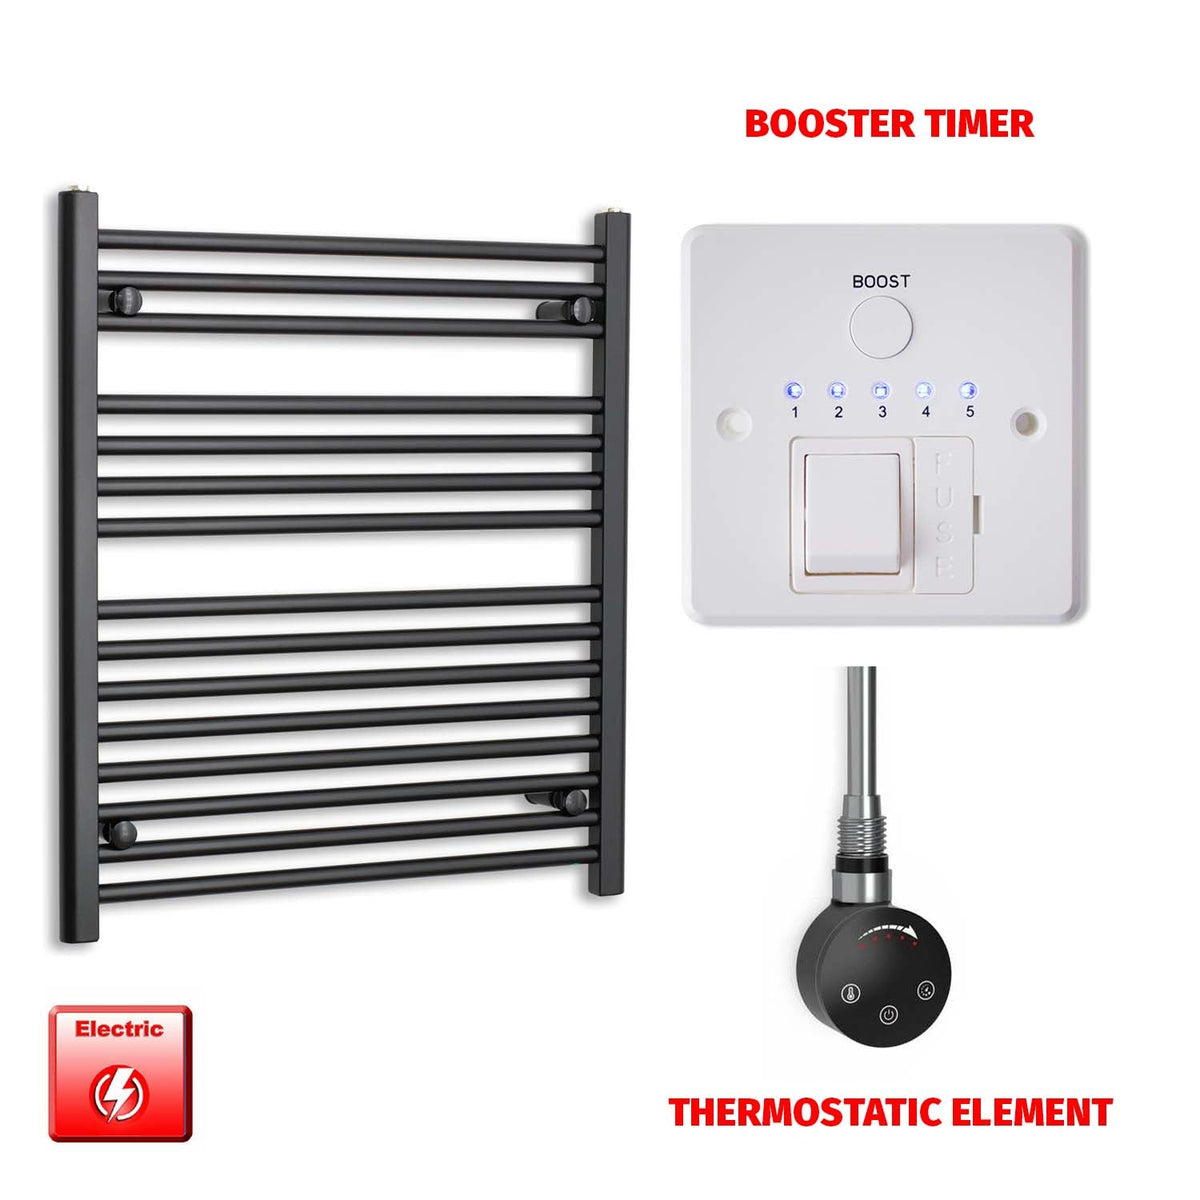 800 x 700 Flat Black Pre-Filled Electric Heated Towel Radiator HTR Smart Thermostatic Booster Timer